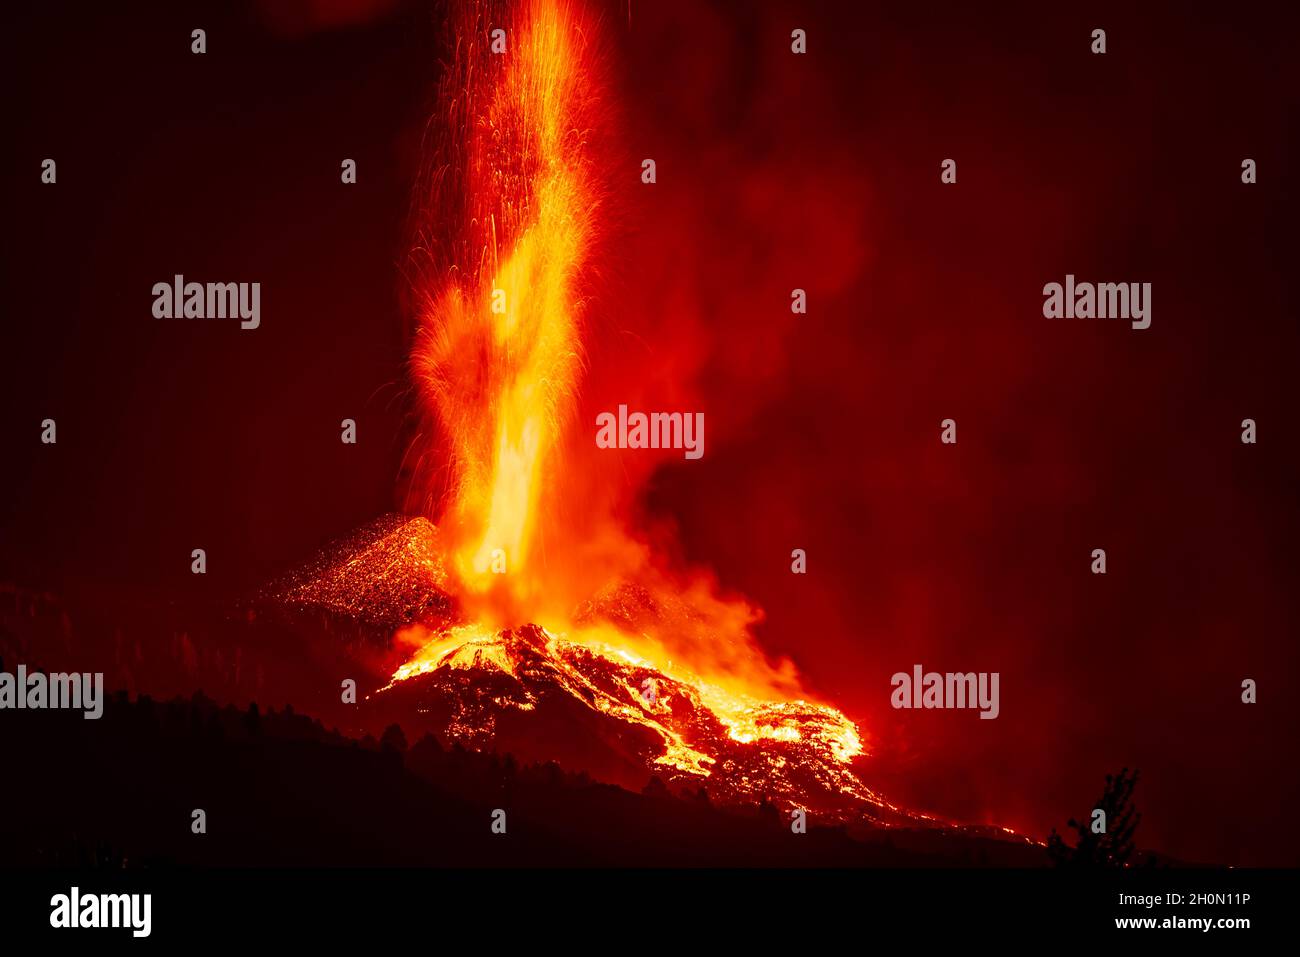 Lava fountains and multiple lava flows descend from the active crater during the volcano eruption on La Palma Island, Canary Islands, Spain, in Sep 21 Stock Photo